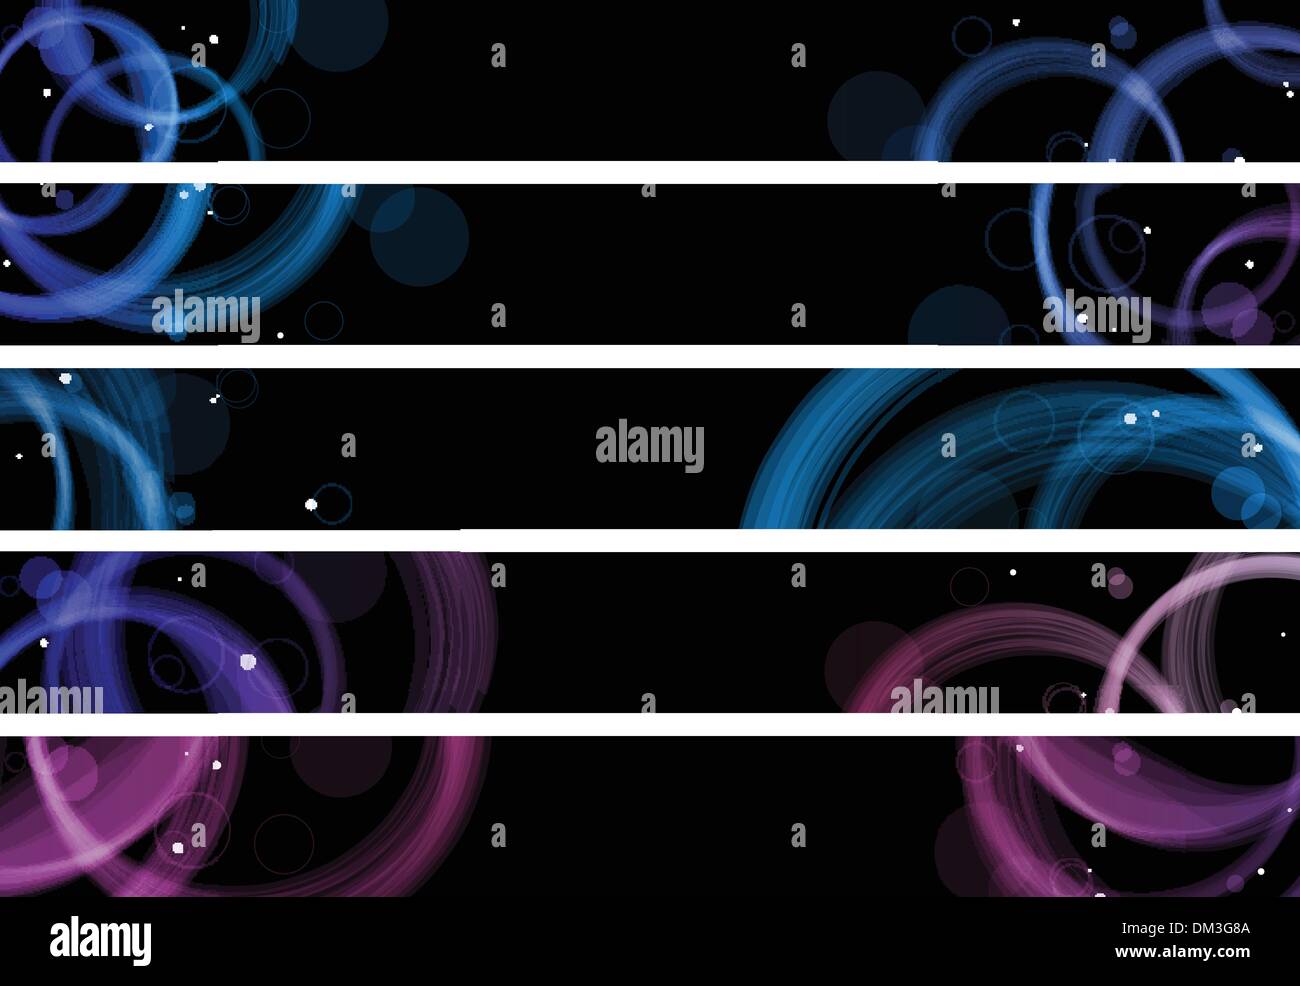 Abstract Colorful Circles Web Banners Size 728x90 Px Stock Vector